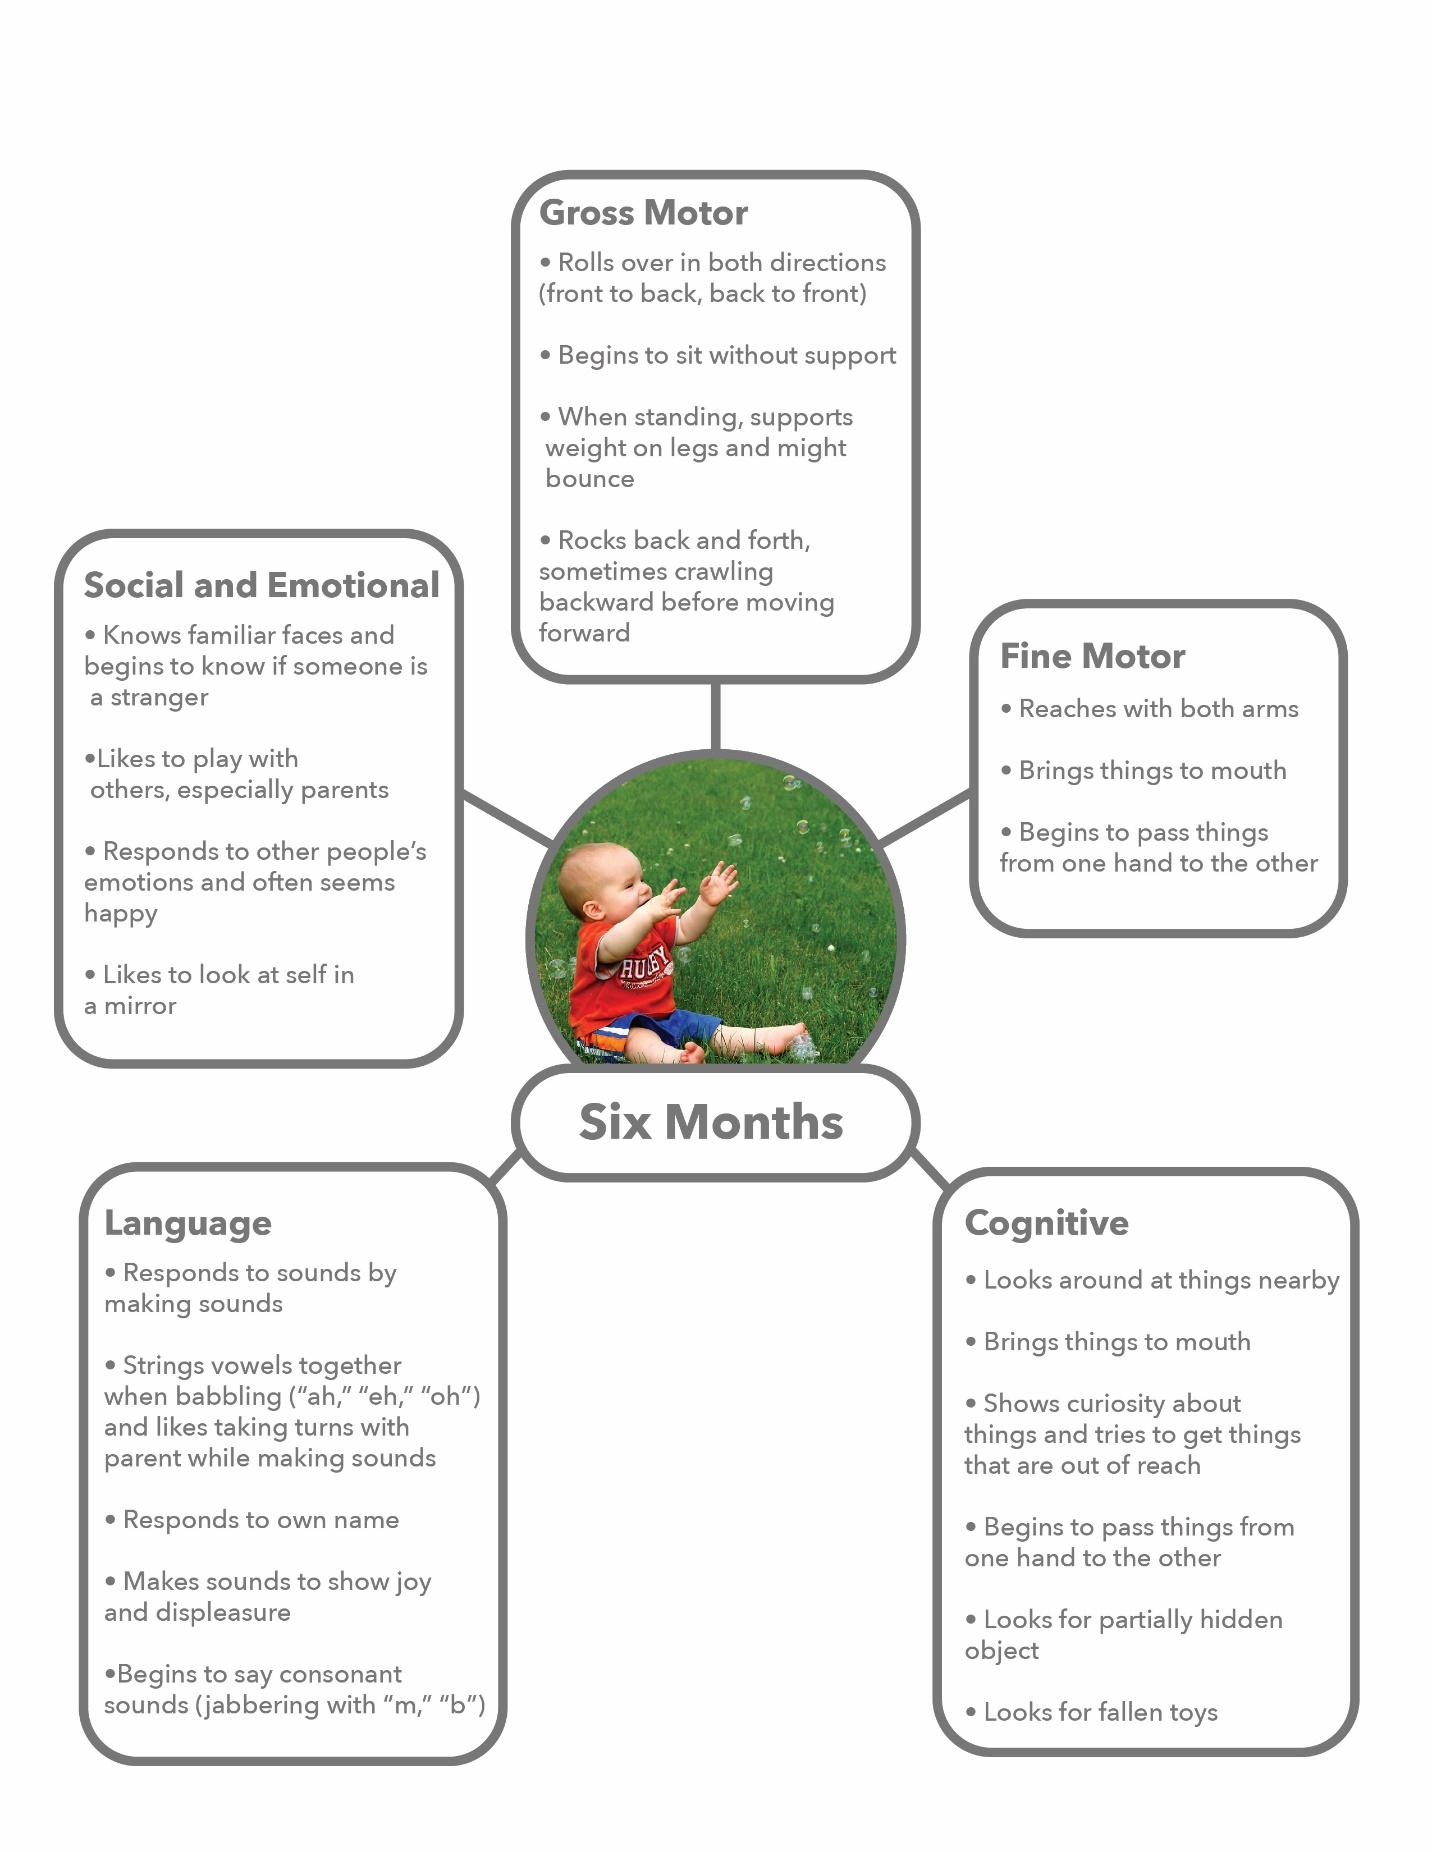 A graphic showing the develomental milestones of a six-month-old